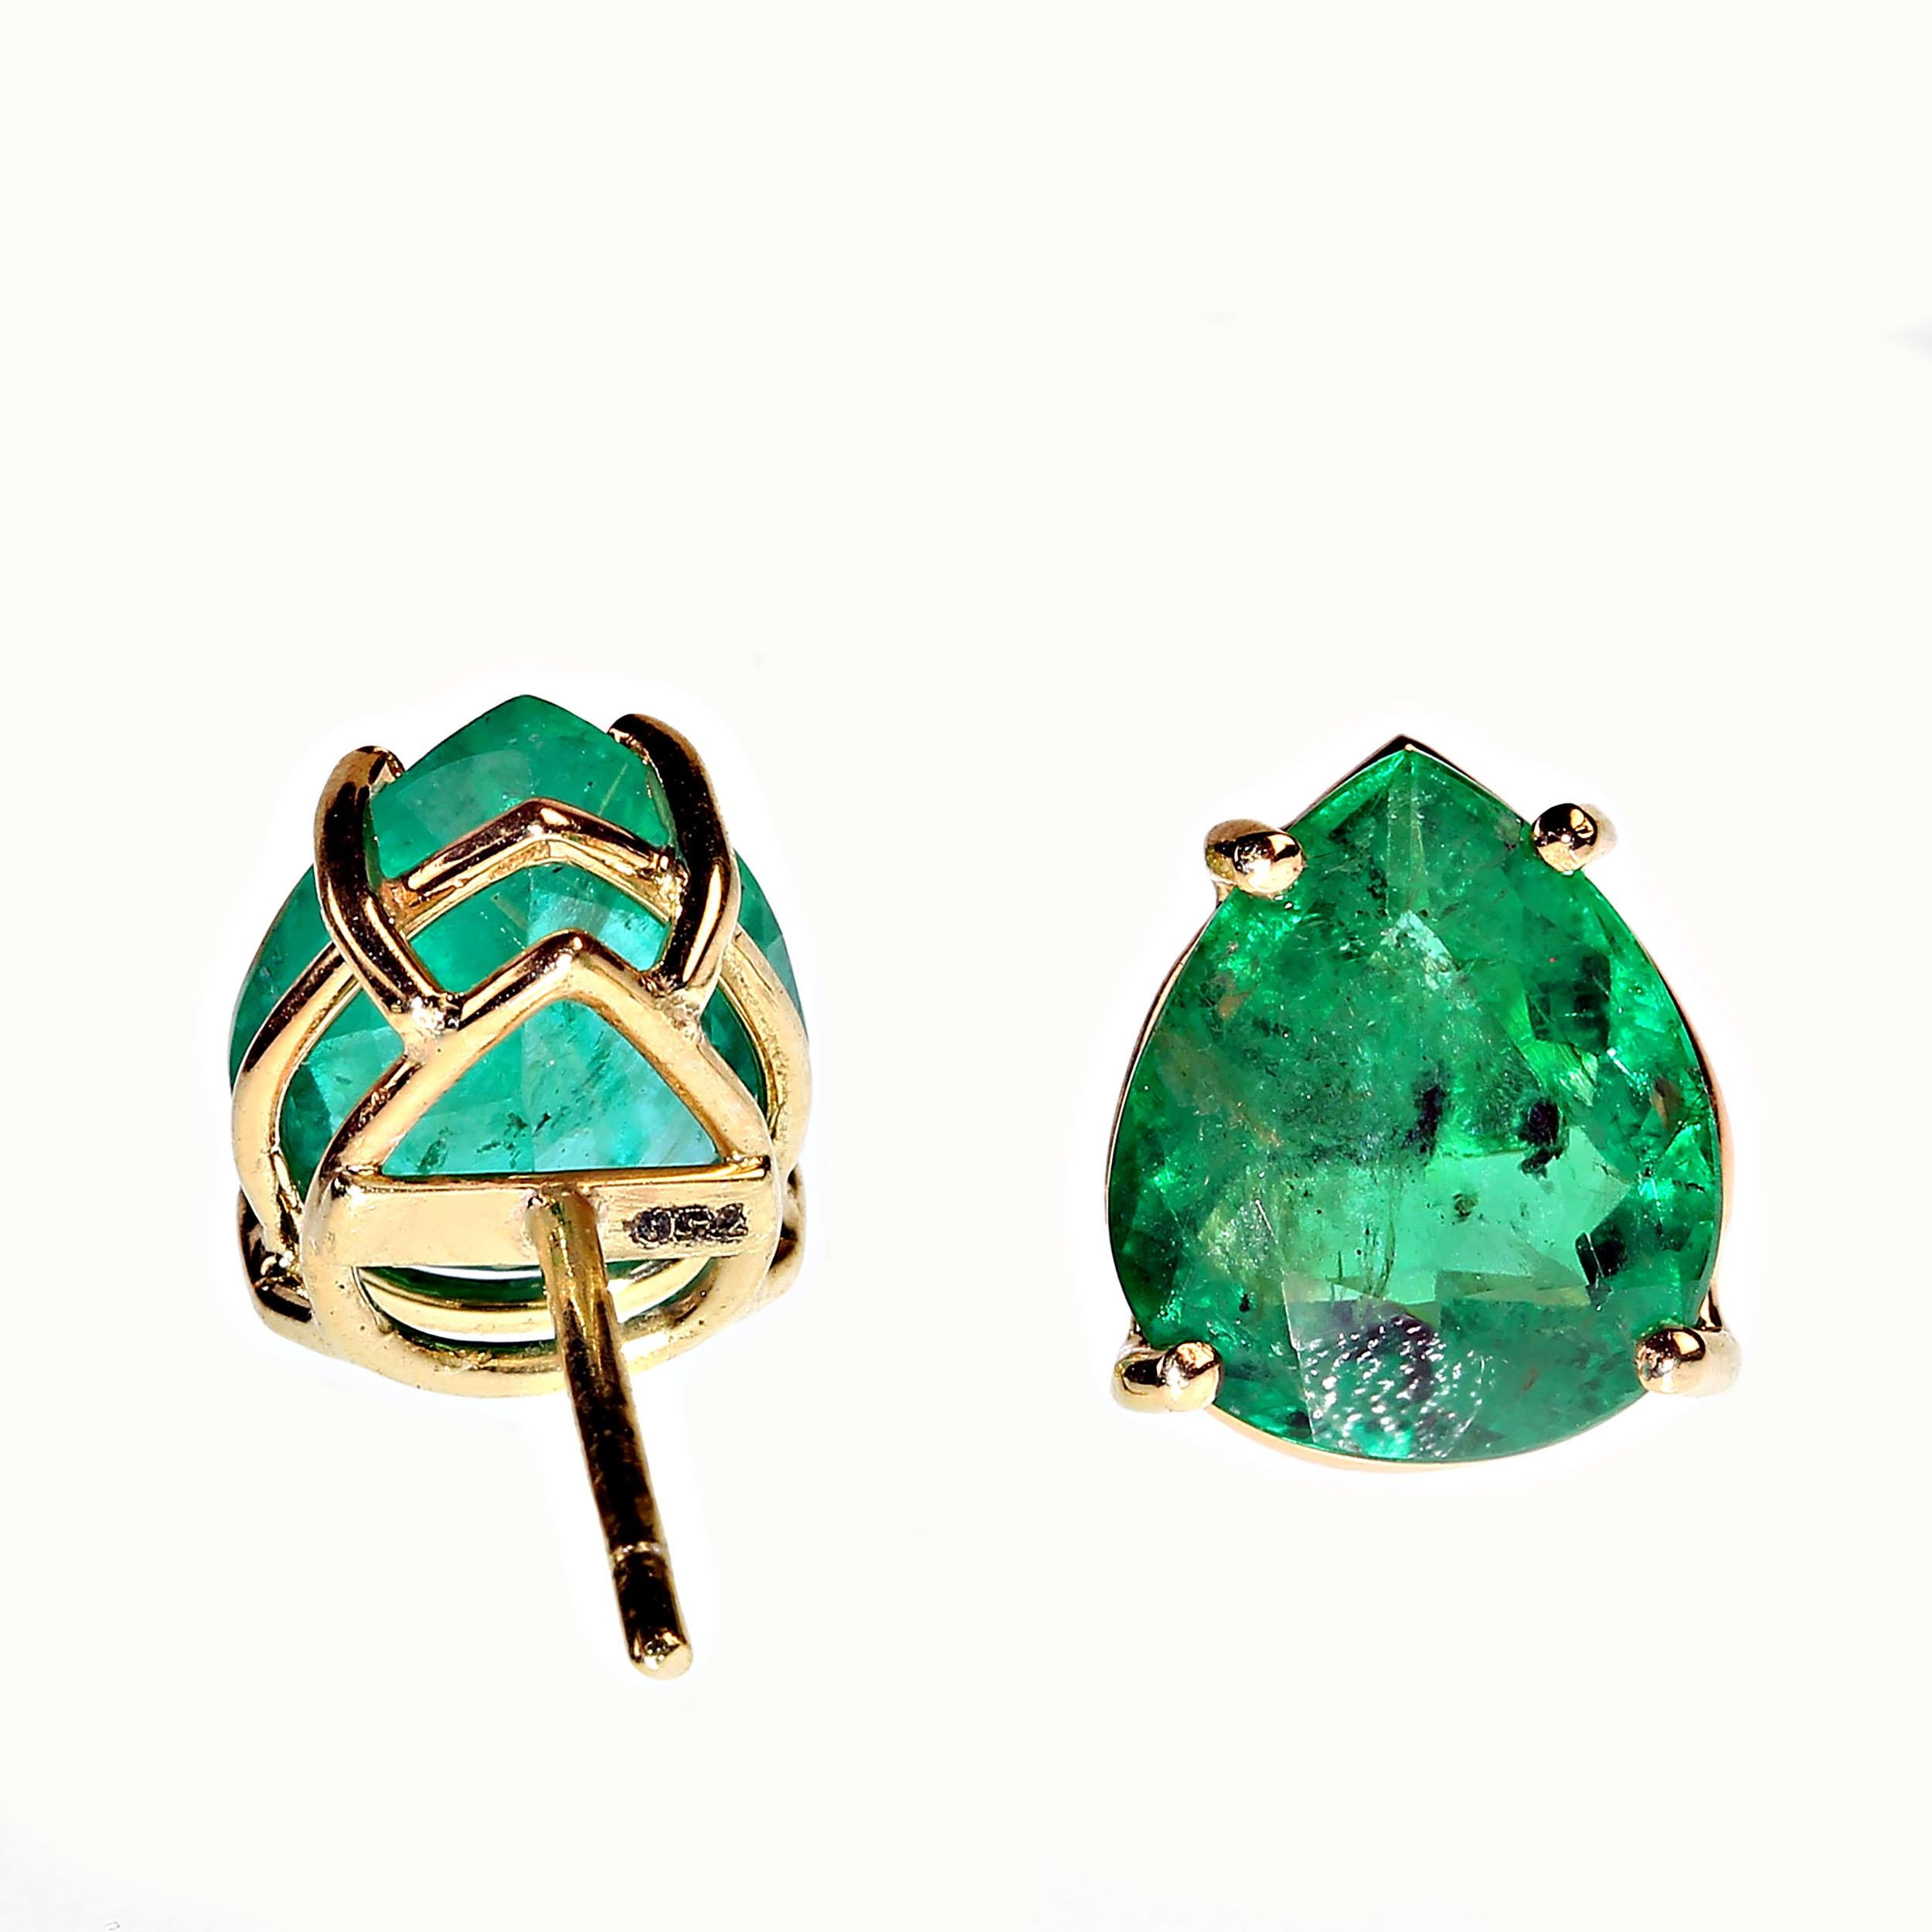 AJD Awesomely Elegant Emerald Earrings in 18K Yellow Gold In New Condition For Sale In Raleigh, NC